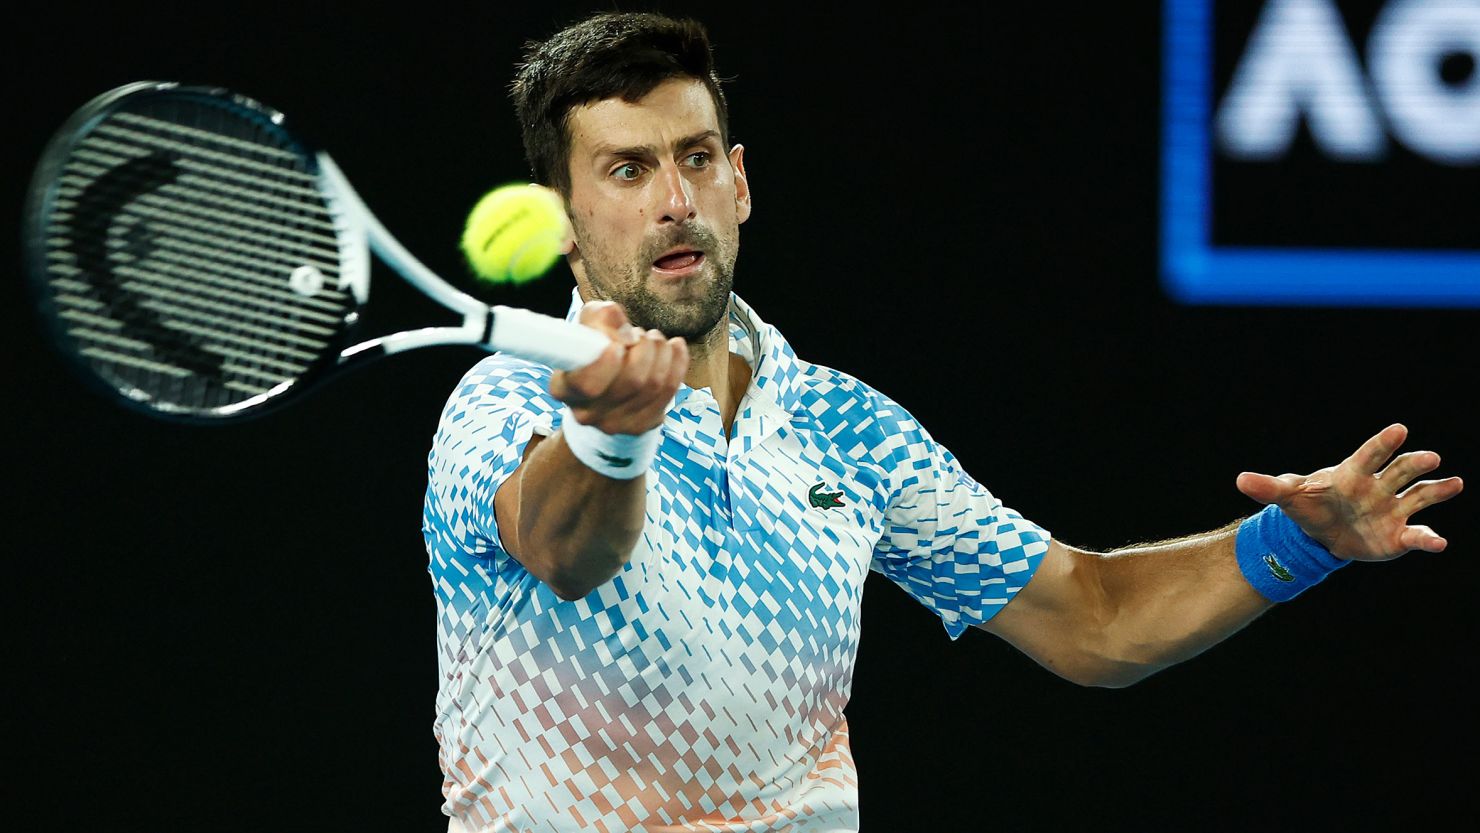 Djokovic, who is unvaccinated against Covid-19, said last month that he had hoped for a "positive result" on being able to receive special permission to play tournaments in the US.